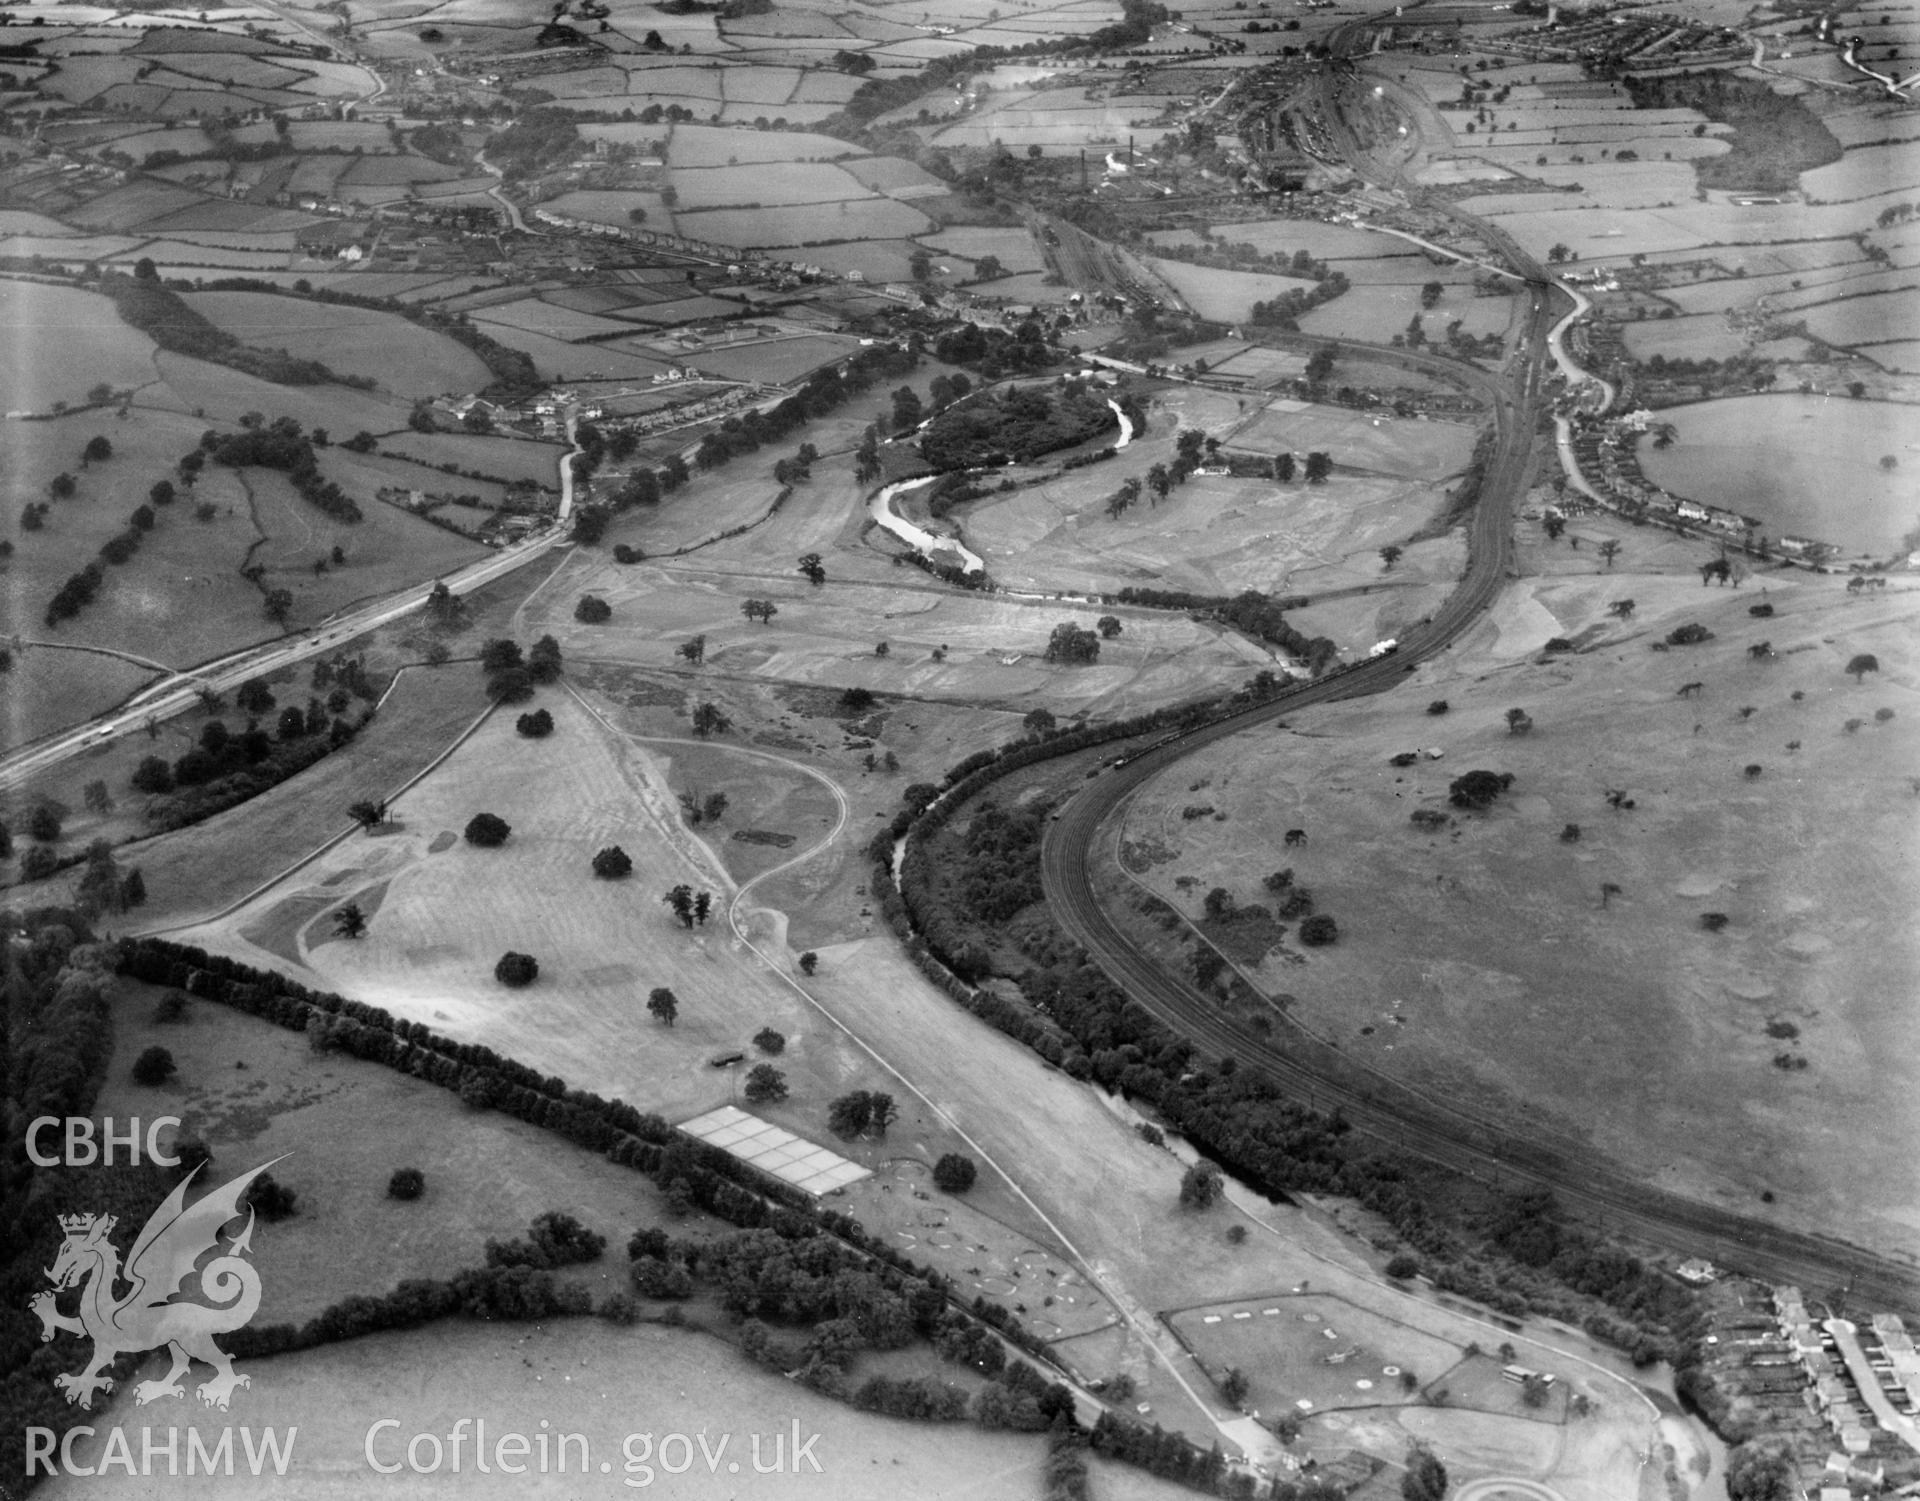 View of  Tredegar Park golf club, showing distant view of Rogerstone and Bassaleg, oblique aerial view. 5?x4? black and white glass plate negative.